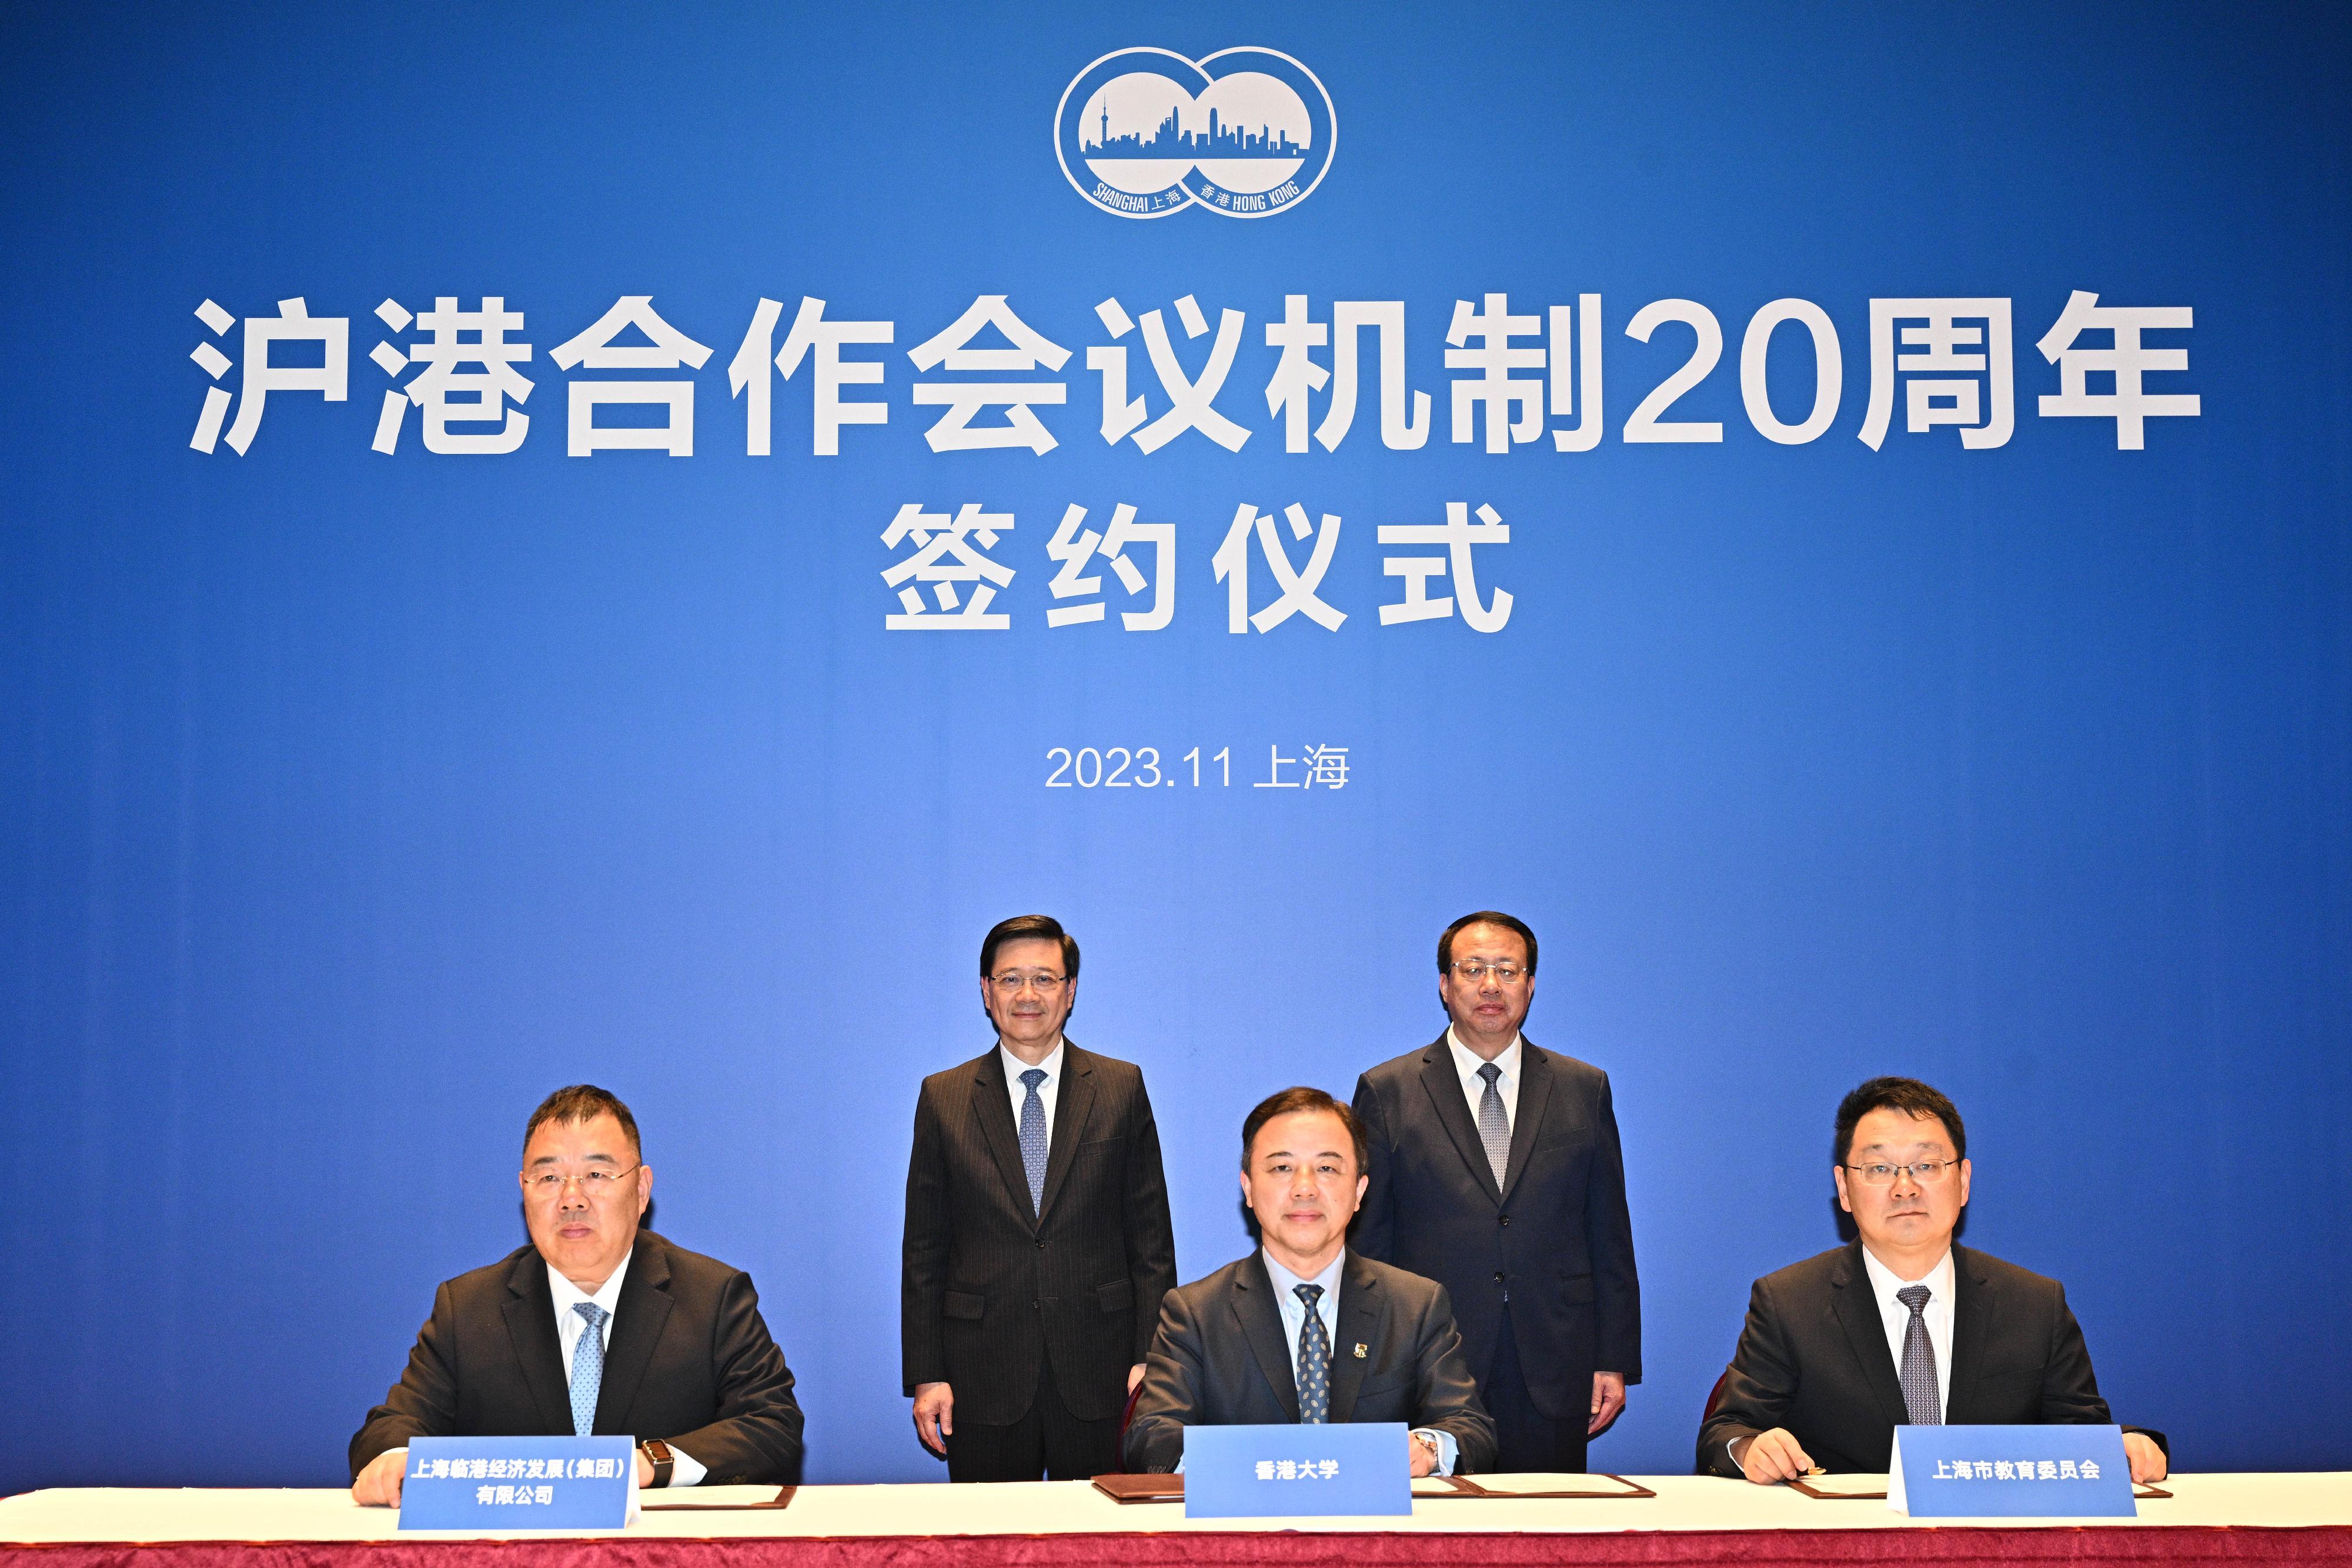 The Chief Executive, Mr John Lee, met with the Secretary of the CPC Shanghai Municipal Committee, Mr Chen Jining, and the Mayor of Shanghai, Mr Gong Zheng, in Shanghai today (November 4). Photo shows Mr Lee (back row, left) and Mr Gong (back row, right) jointly witnessing the signing of co-operation agreements or memoranda of understanding between a government department and organisations of the two places in areas including education, economy and trade, and arbitration after the meeting. 